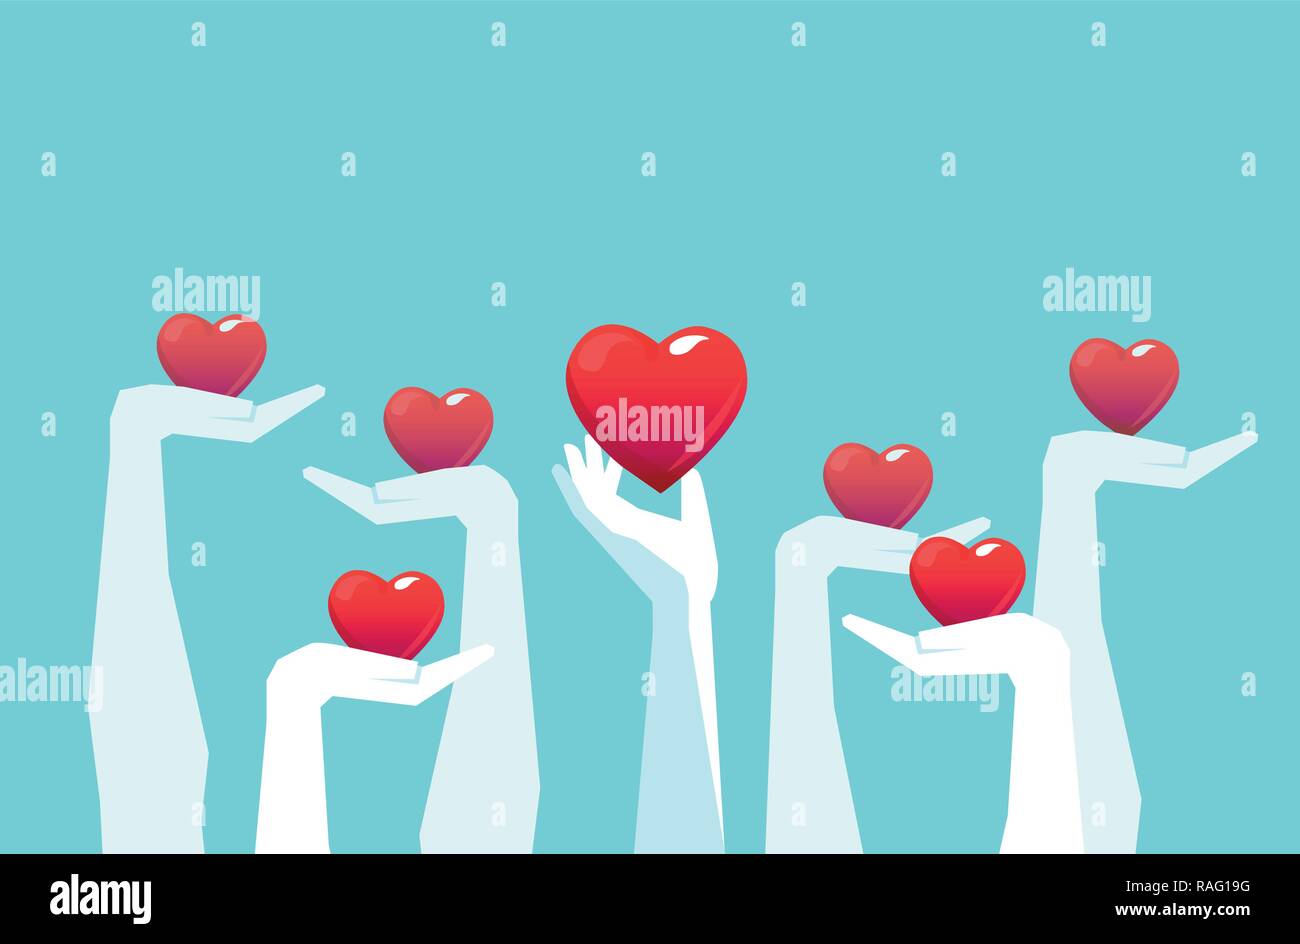 Vector of raised hands holding giving red color hearts isolated on light blue background. Charity volunteering voting concept. Stock Vector